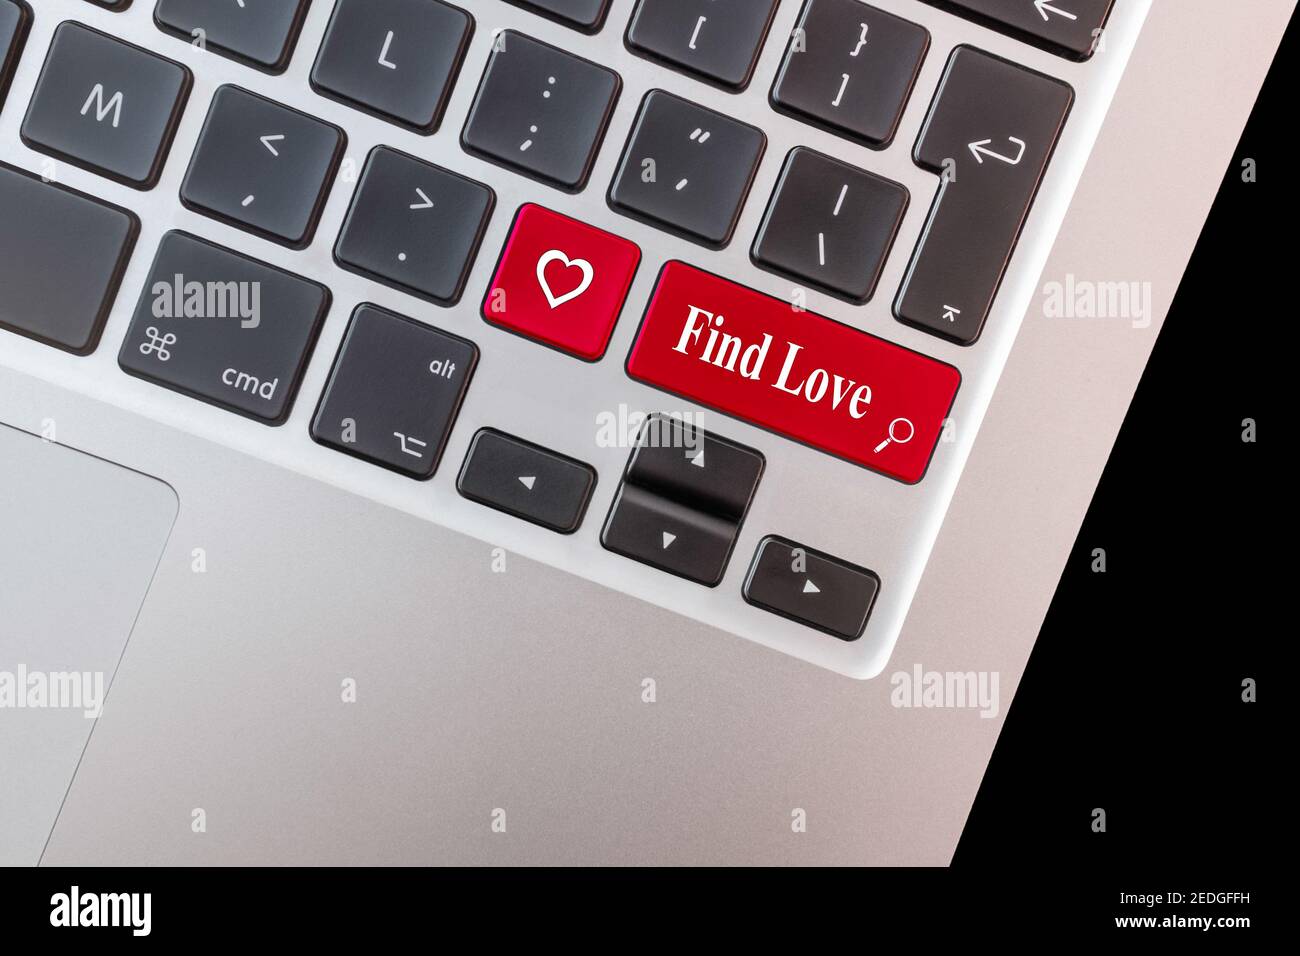 Computer key with love shape and the words find love. Stock Photo